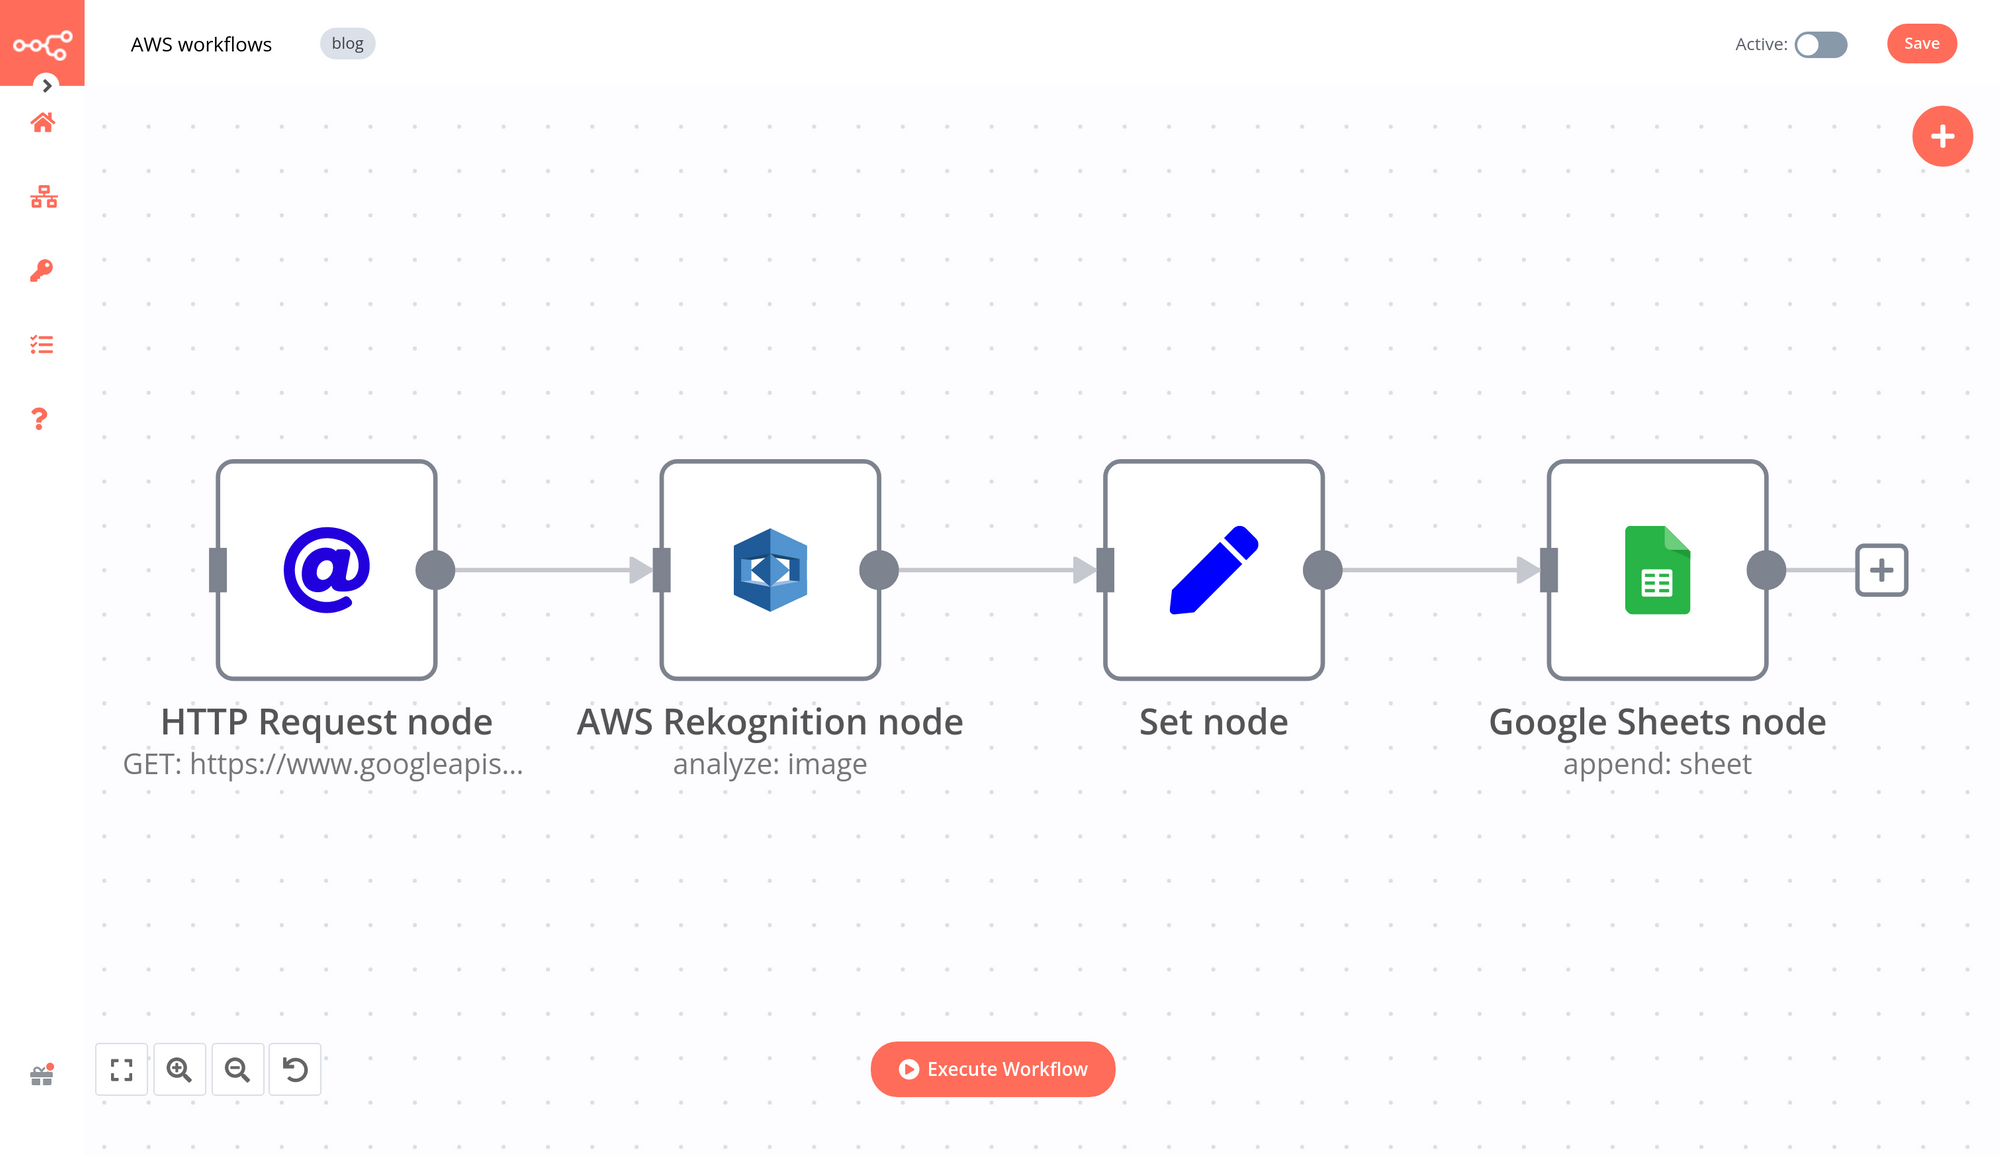 Workflow for labeling images with AWS Rekognition